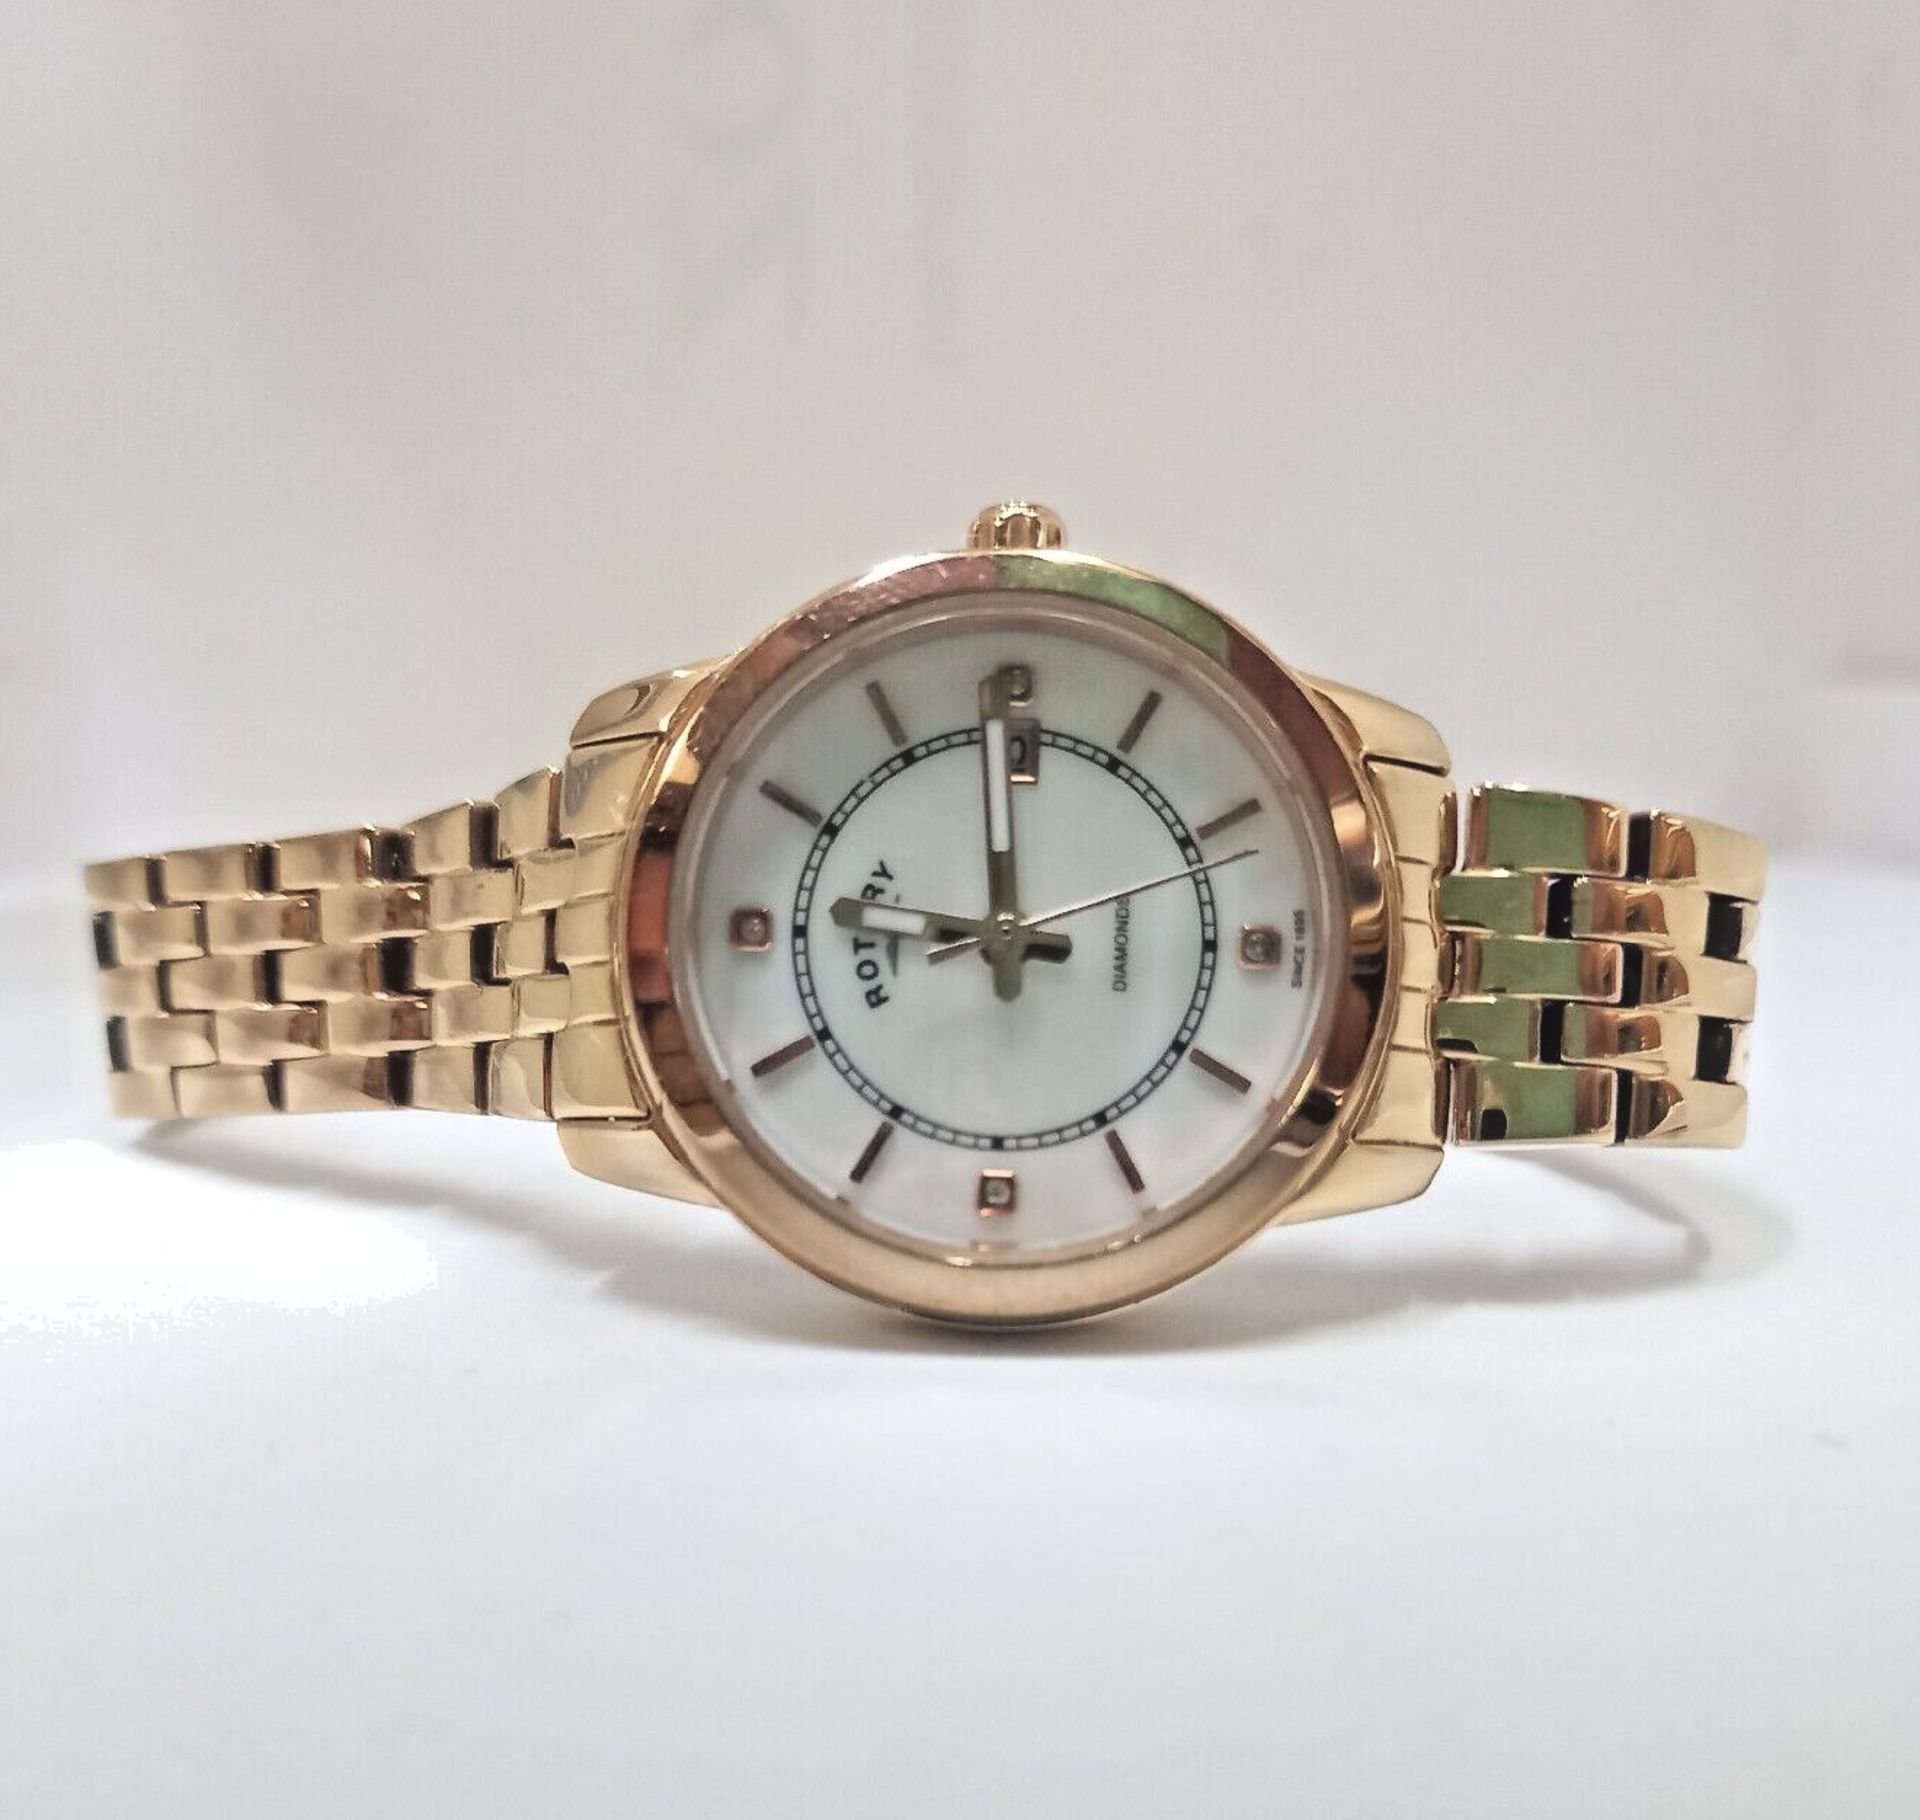 ROTARY LADIES WATCH QUARTZ ROSE GOLD PVD STEEL LB00246/41 DIAMONDS PEARL DIAL - Image 7 of 8